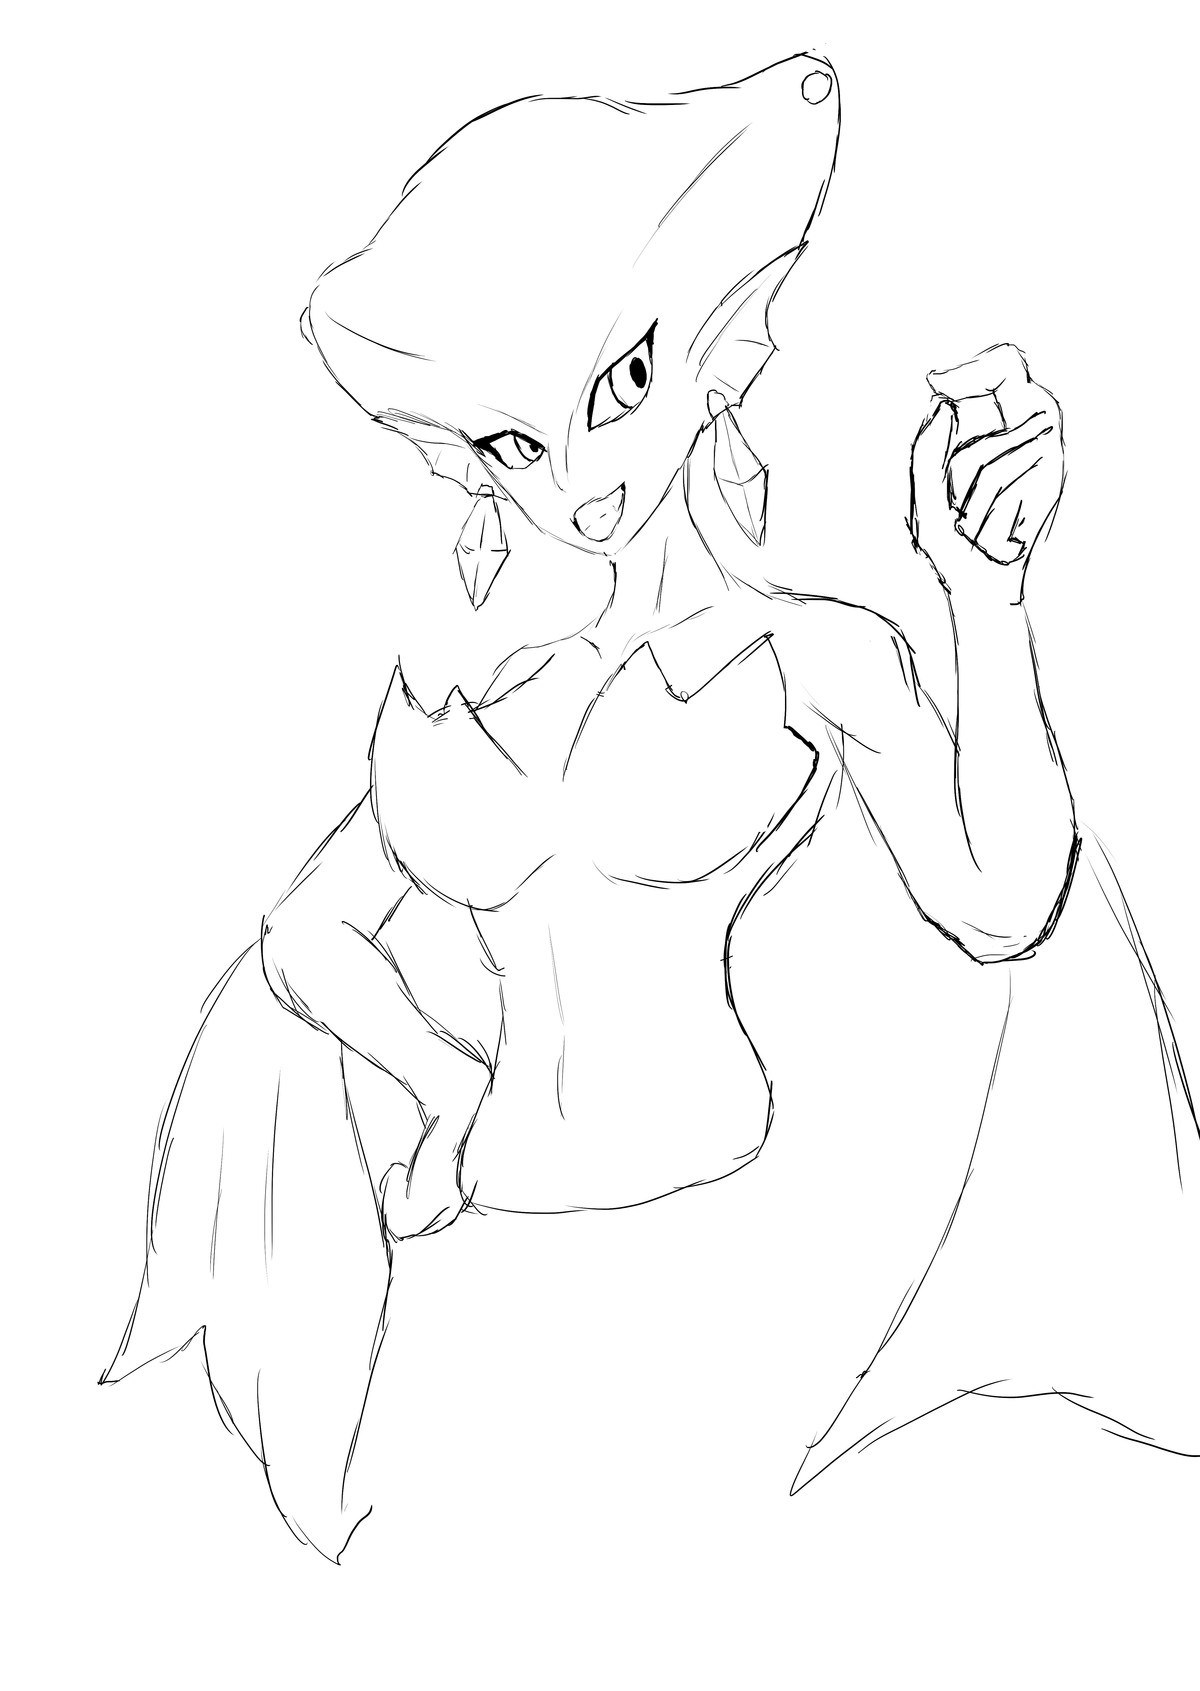 DailyDrawing day 190. Princess Ruto. Fish girl is best girl join list: SupernerdART (100 subs)Mention History.. I will now proceed to pleasure myself with this fish!